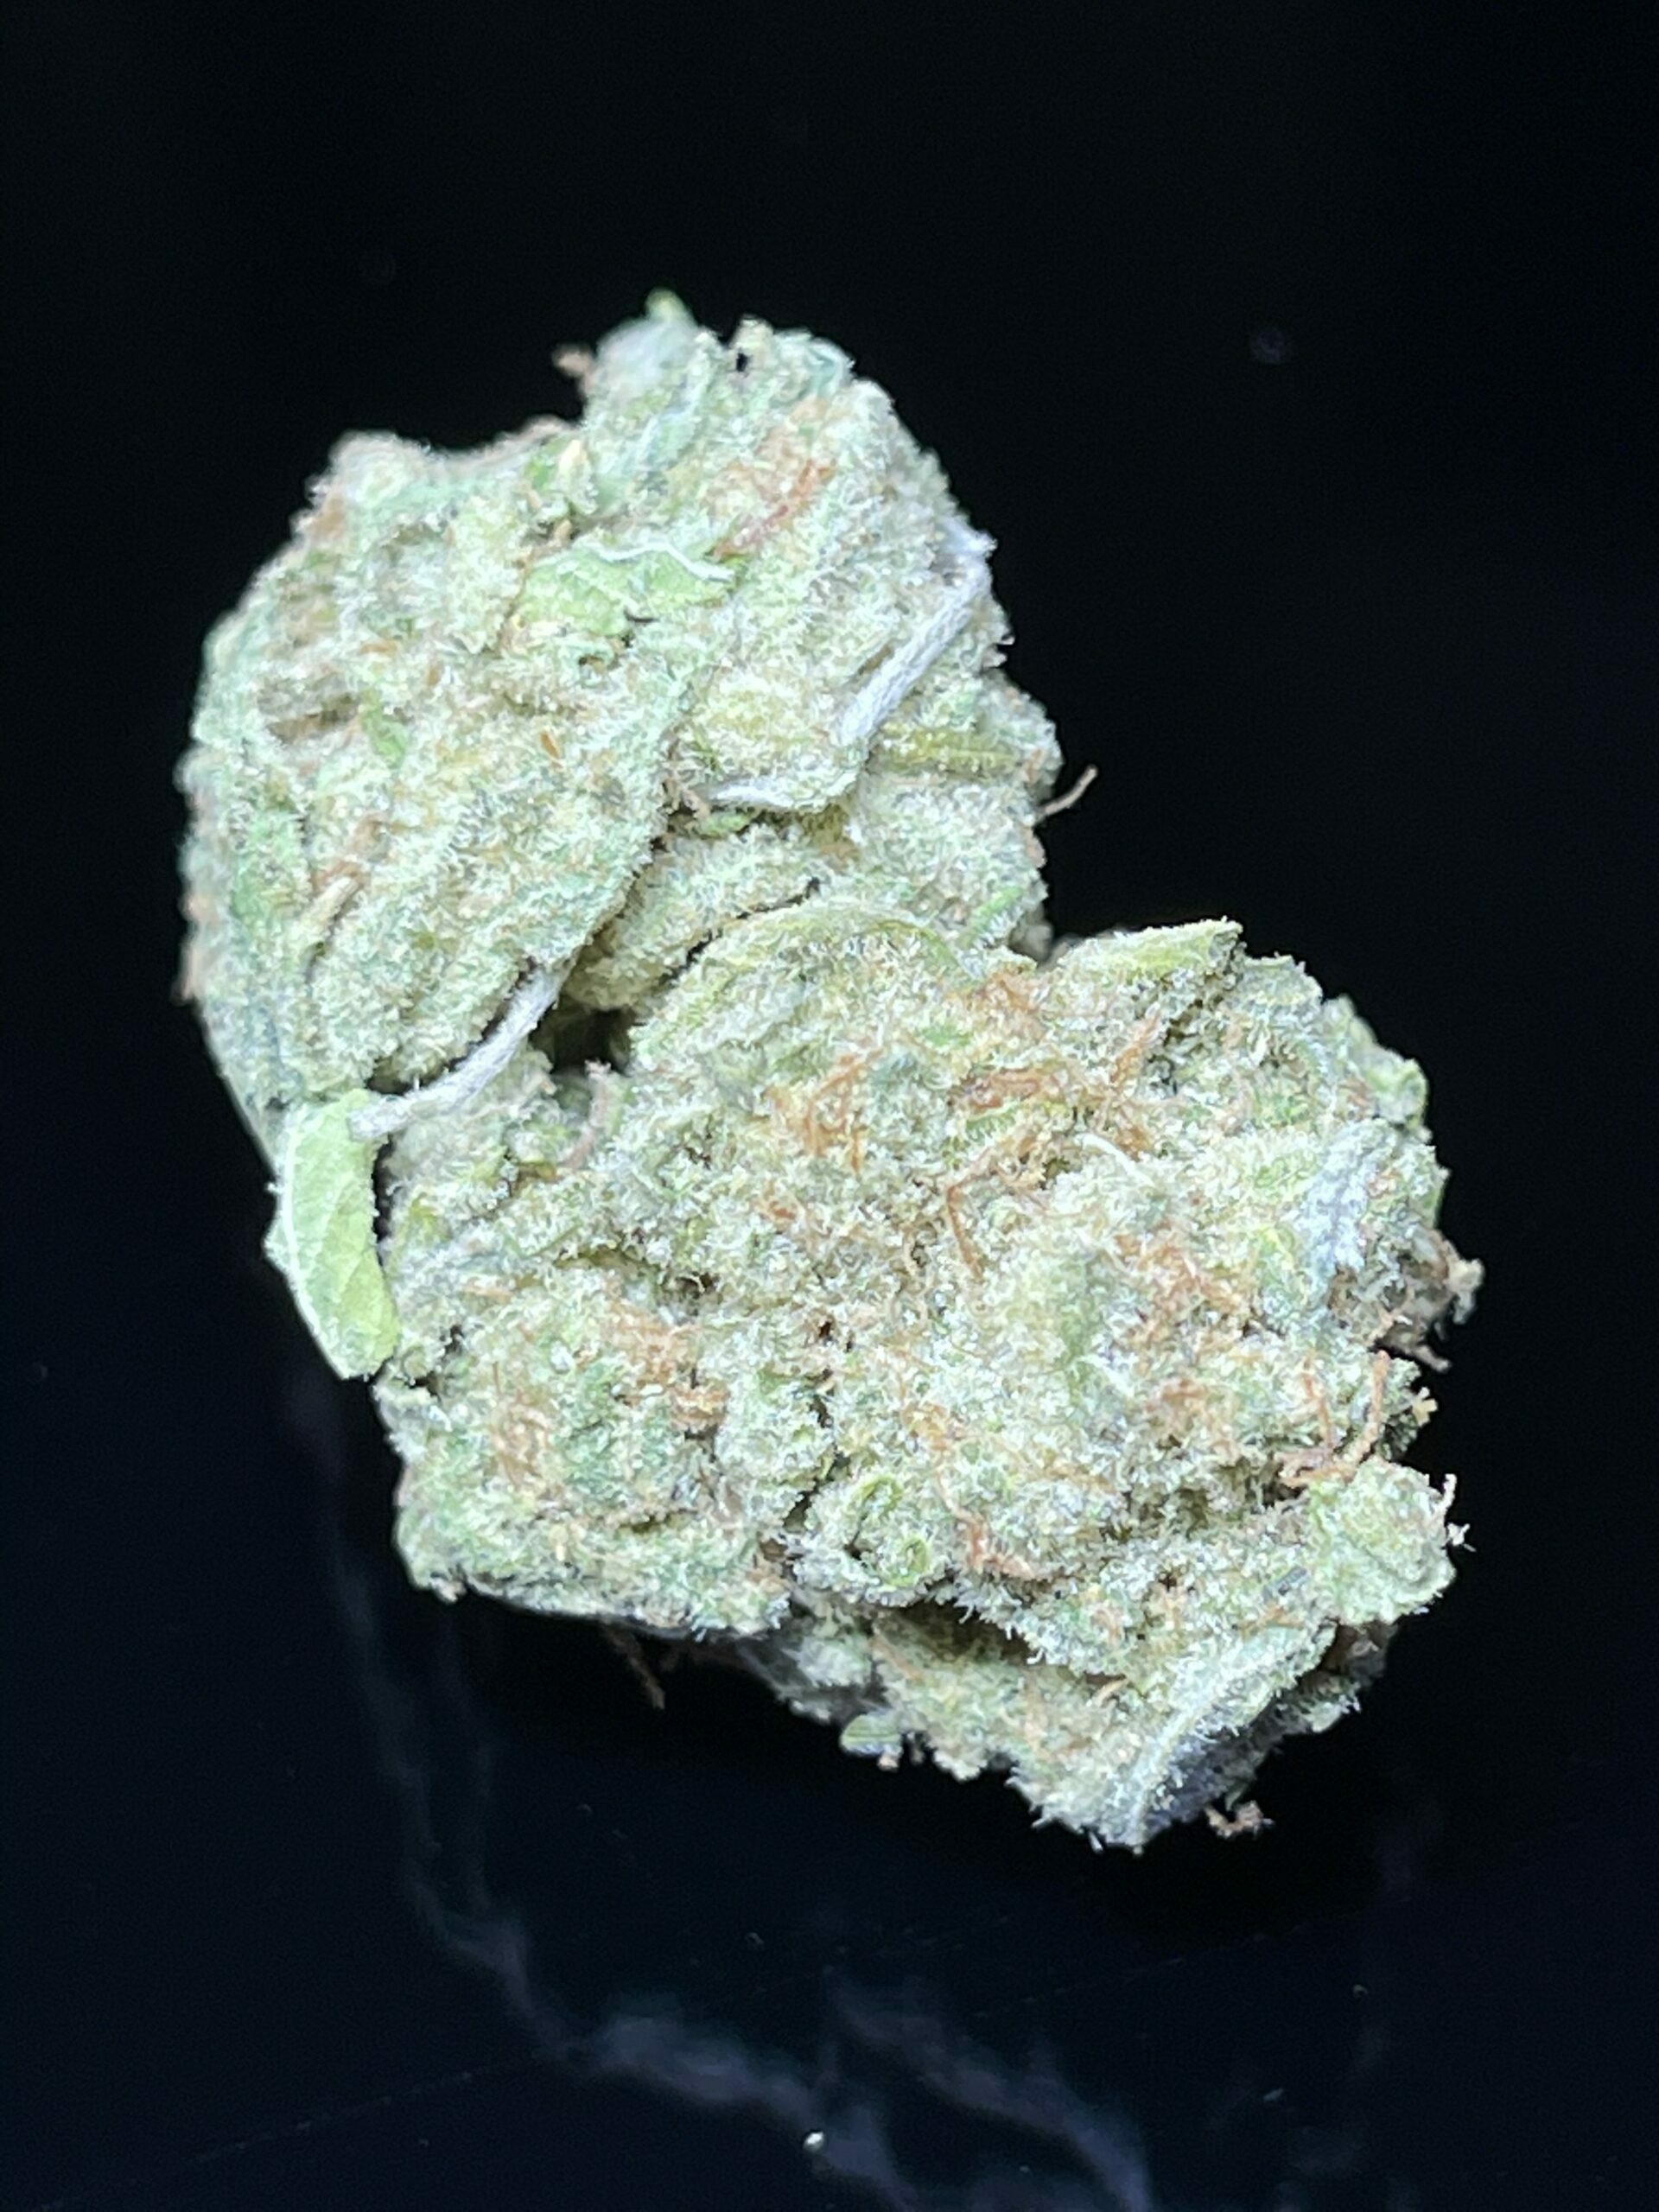 QUEEN MOTHER GOJI - MONDAY SALE 20 off on oz, 10 off on 1/2oz - Good ...